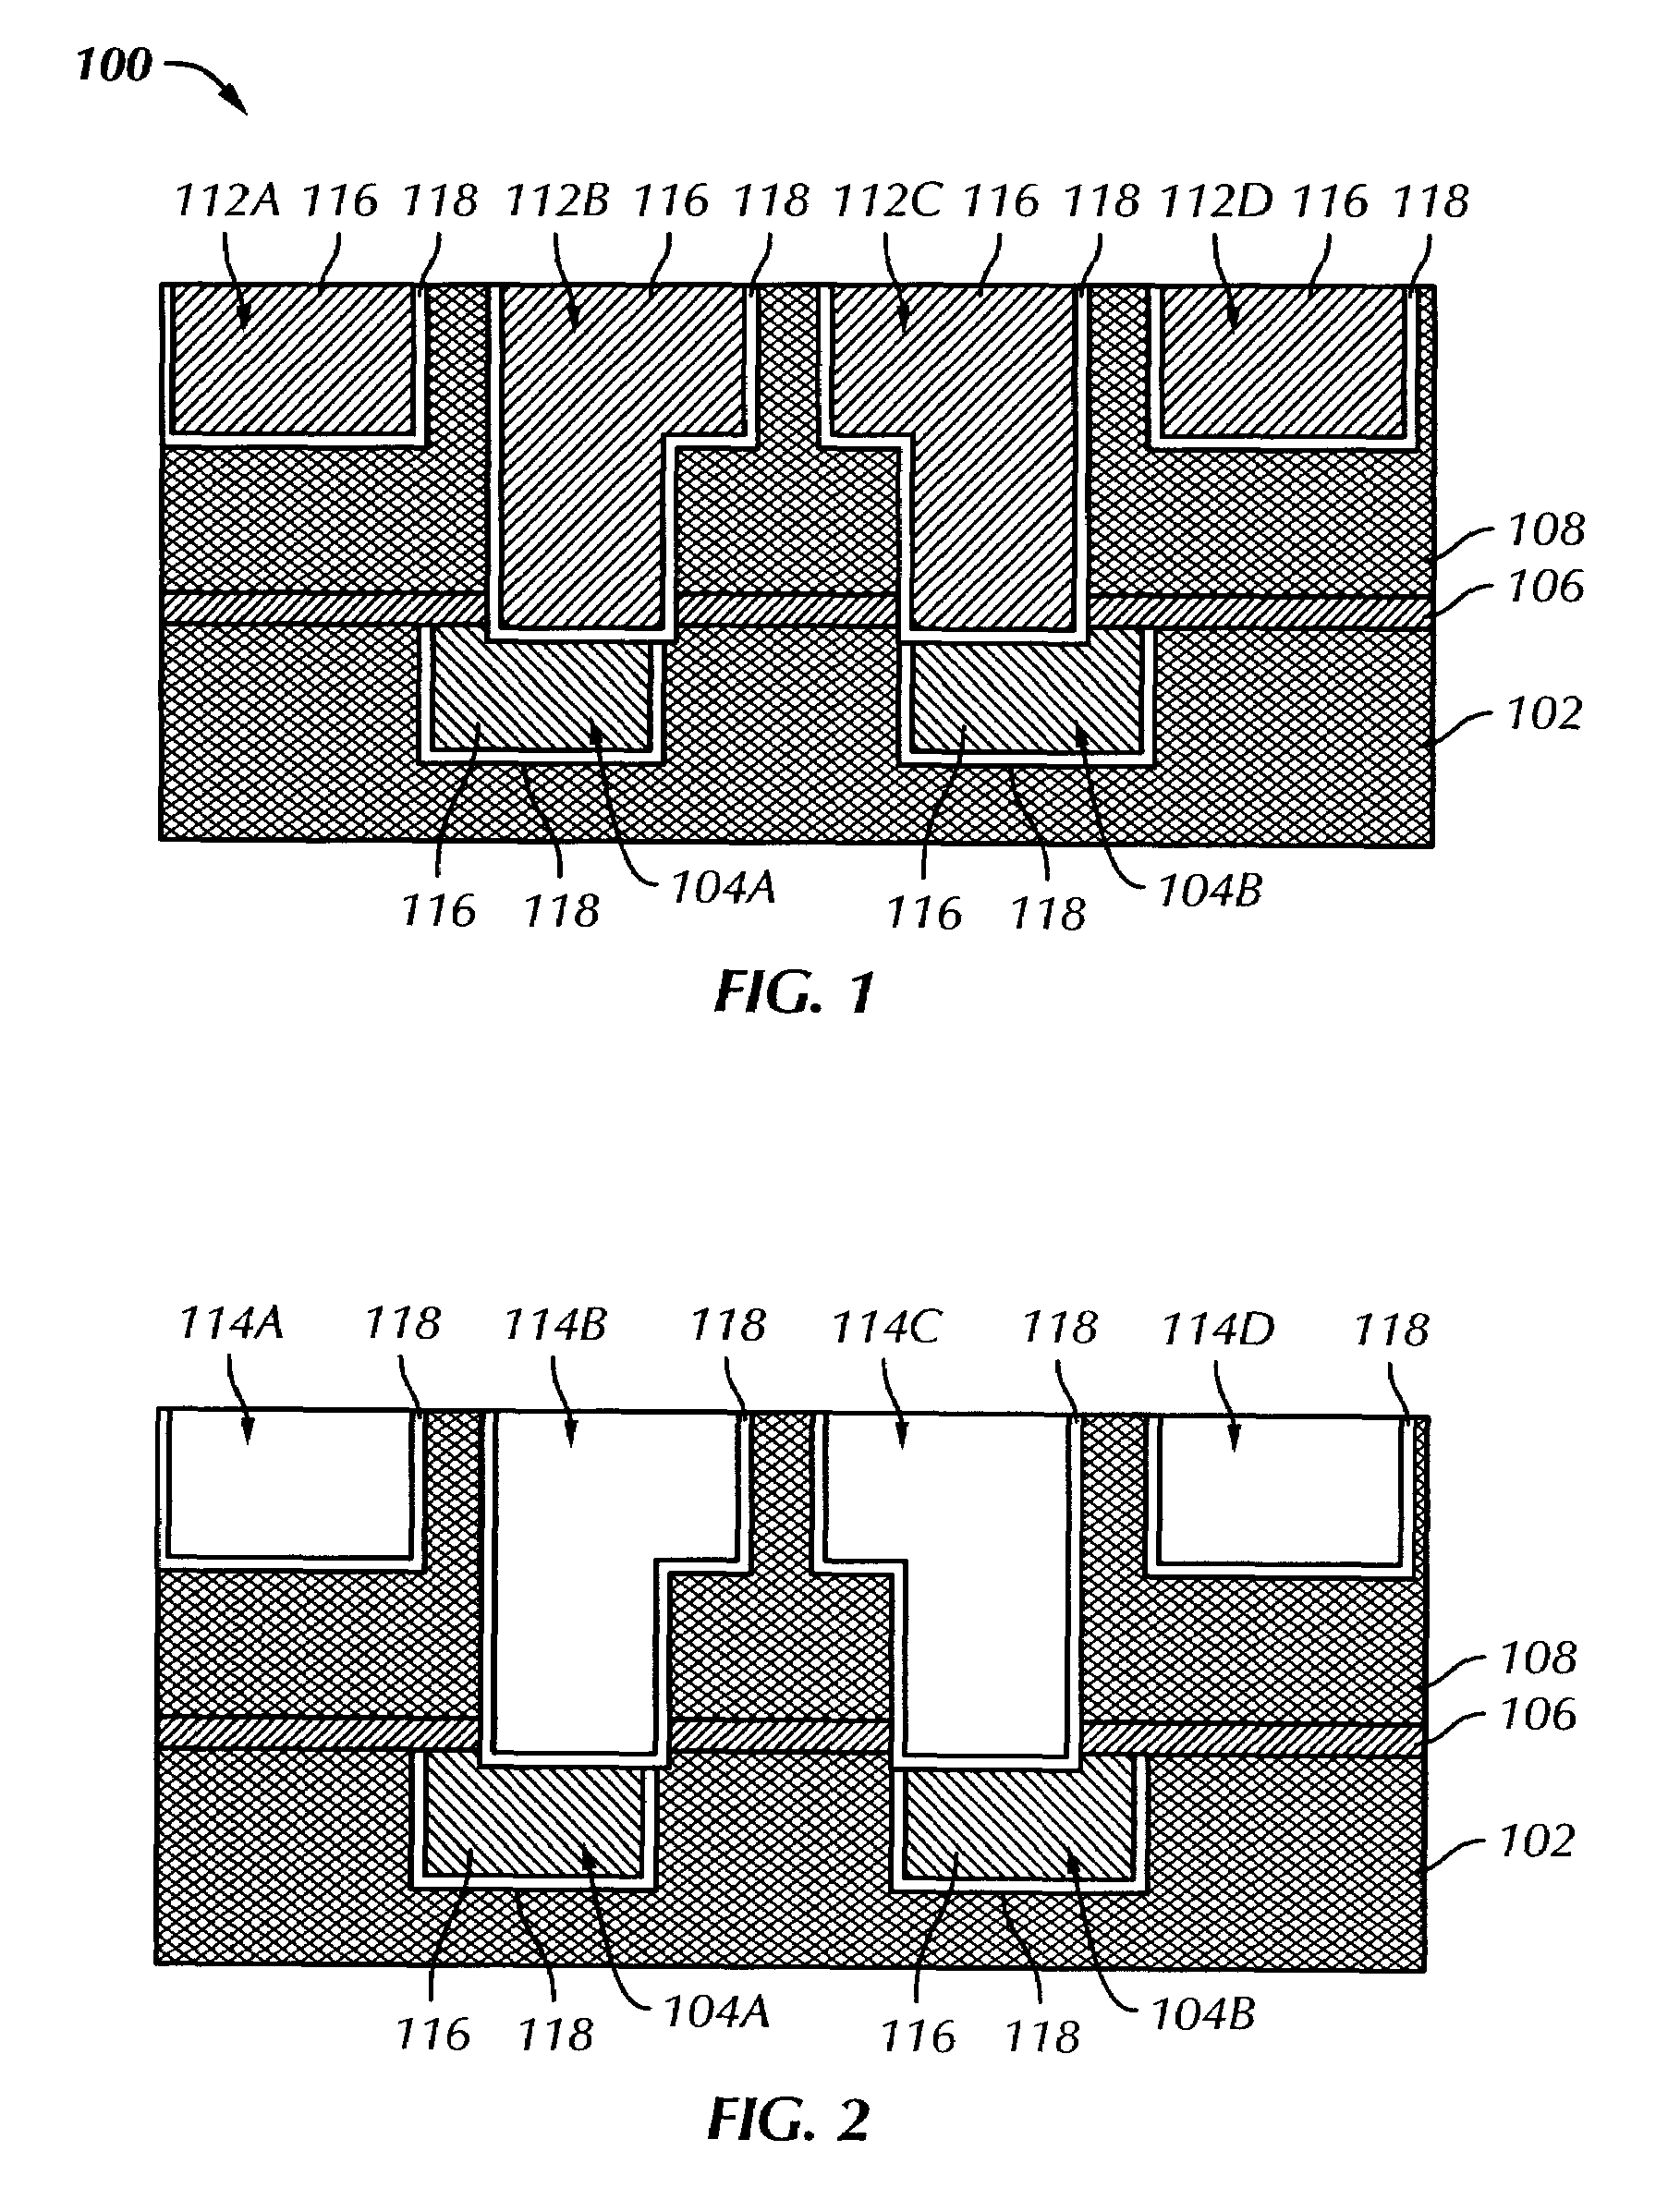 Reversible electric fuse and antifuse structures for semiconductor devices